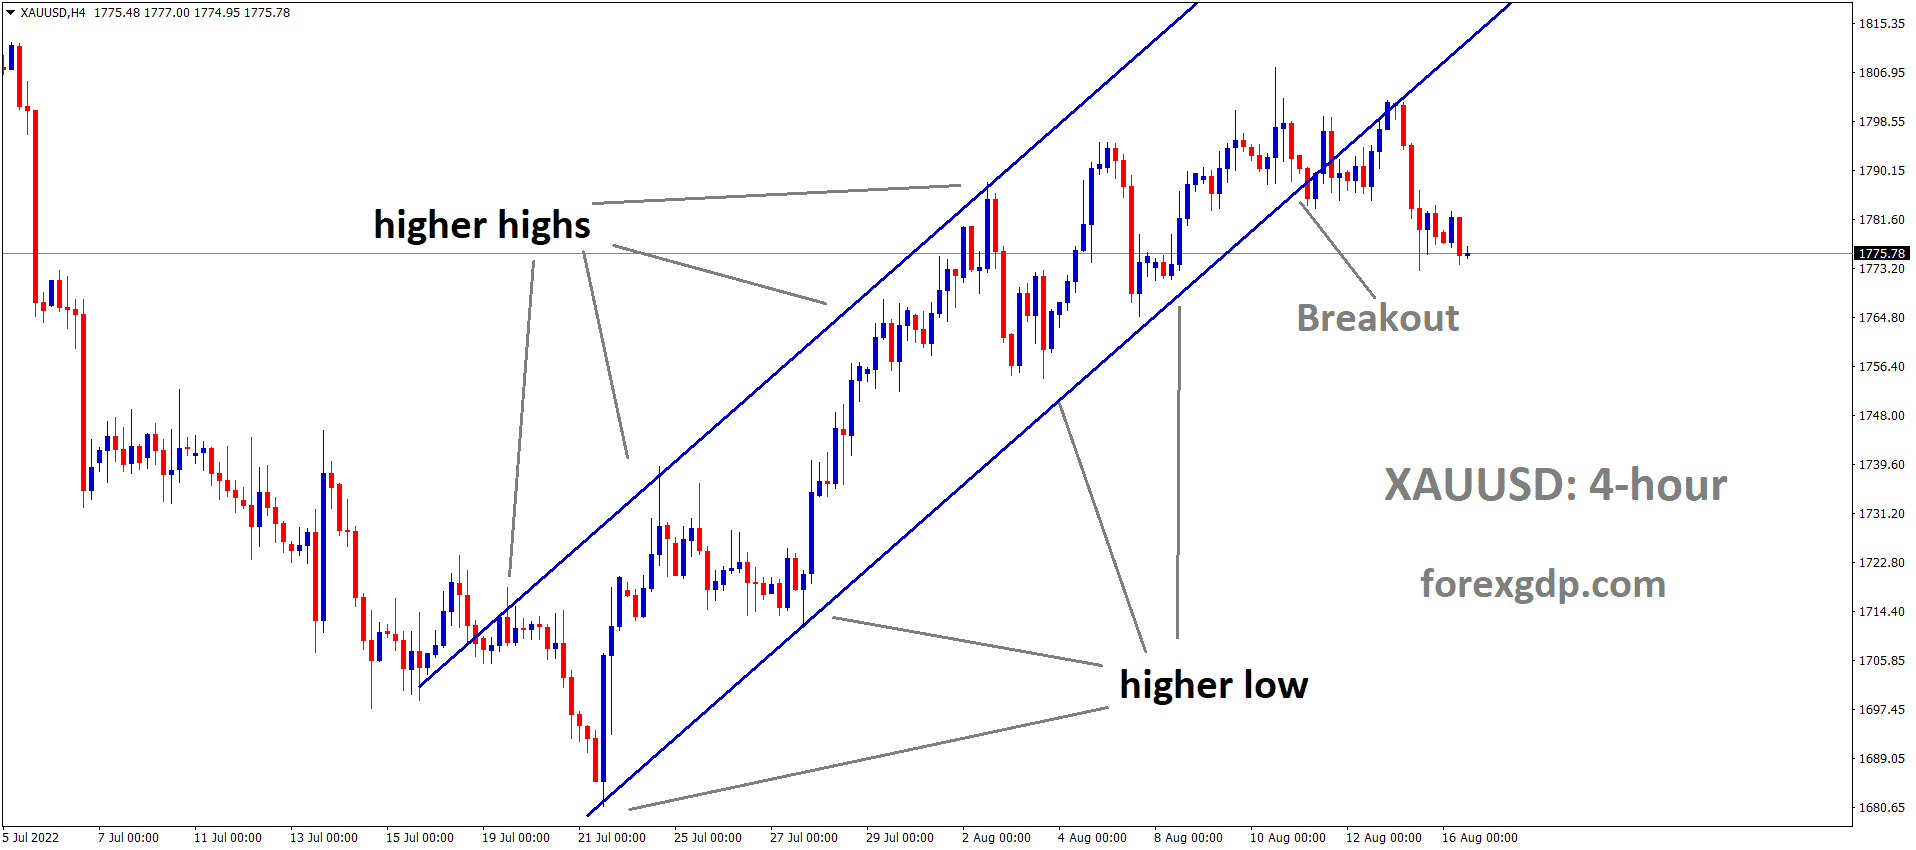 XAUUSD Gold price has broken the Ascending channel in Downside.